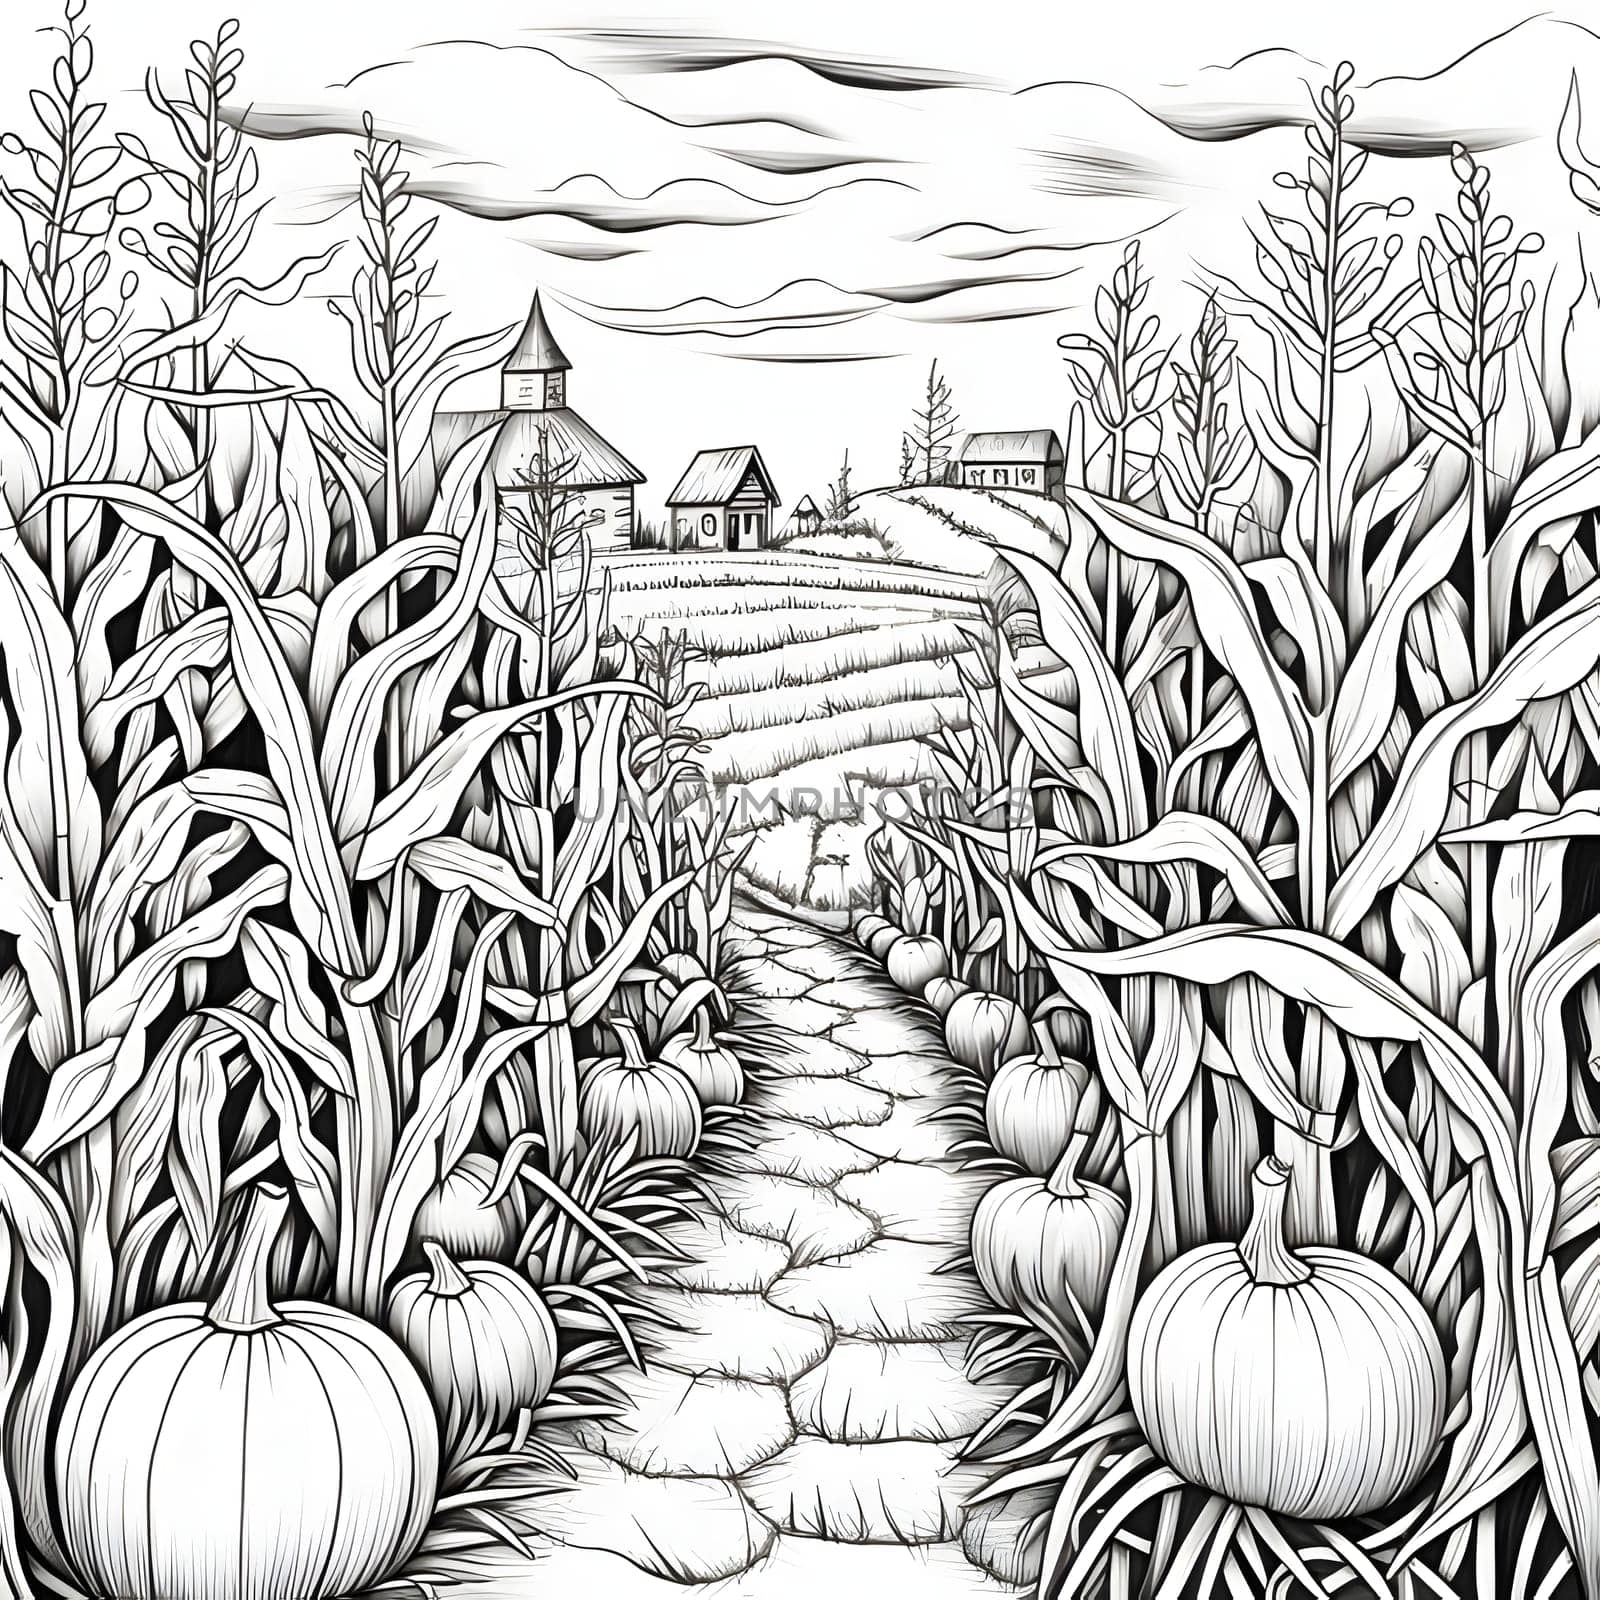 Black and White coloring book corn field with pumpkins, with houses in the background. Corn as a dish of thanksgiving for the harvest, a picture on a white isolated background. by ThemesS